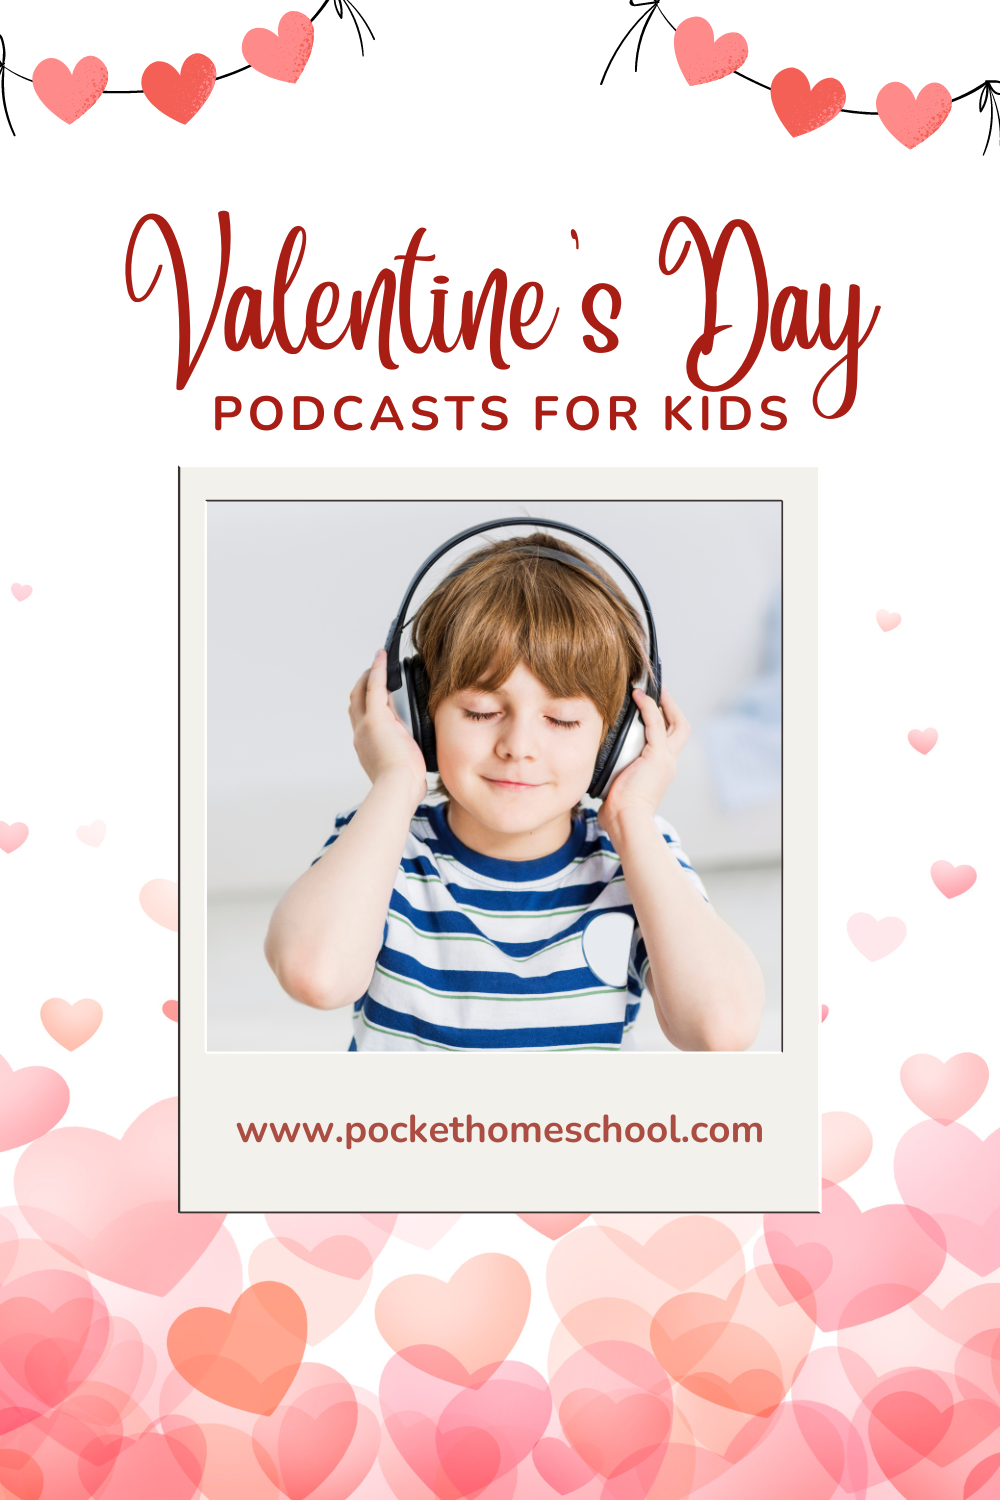 These podcasts for Valentine's Day will have your kids laughing, learning, and loving on this February holiday! Imagine features a kid with headphones inside a photograph frame surrounded by hearts and the words Valentine's Day Podcasts for Kids